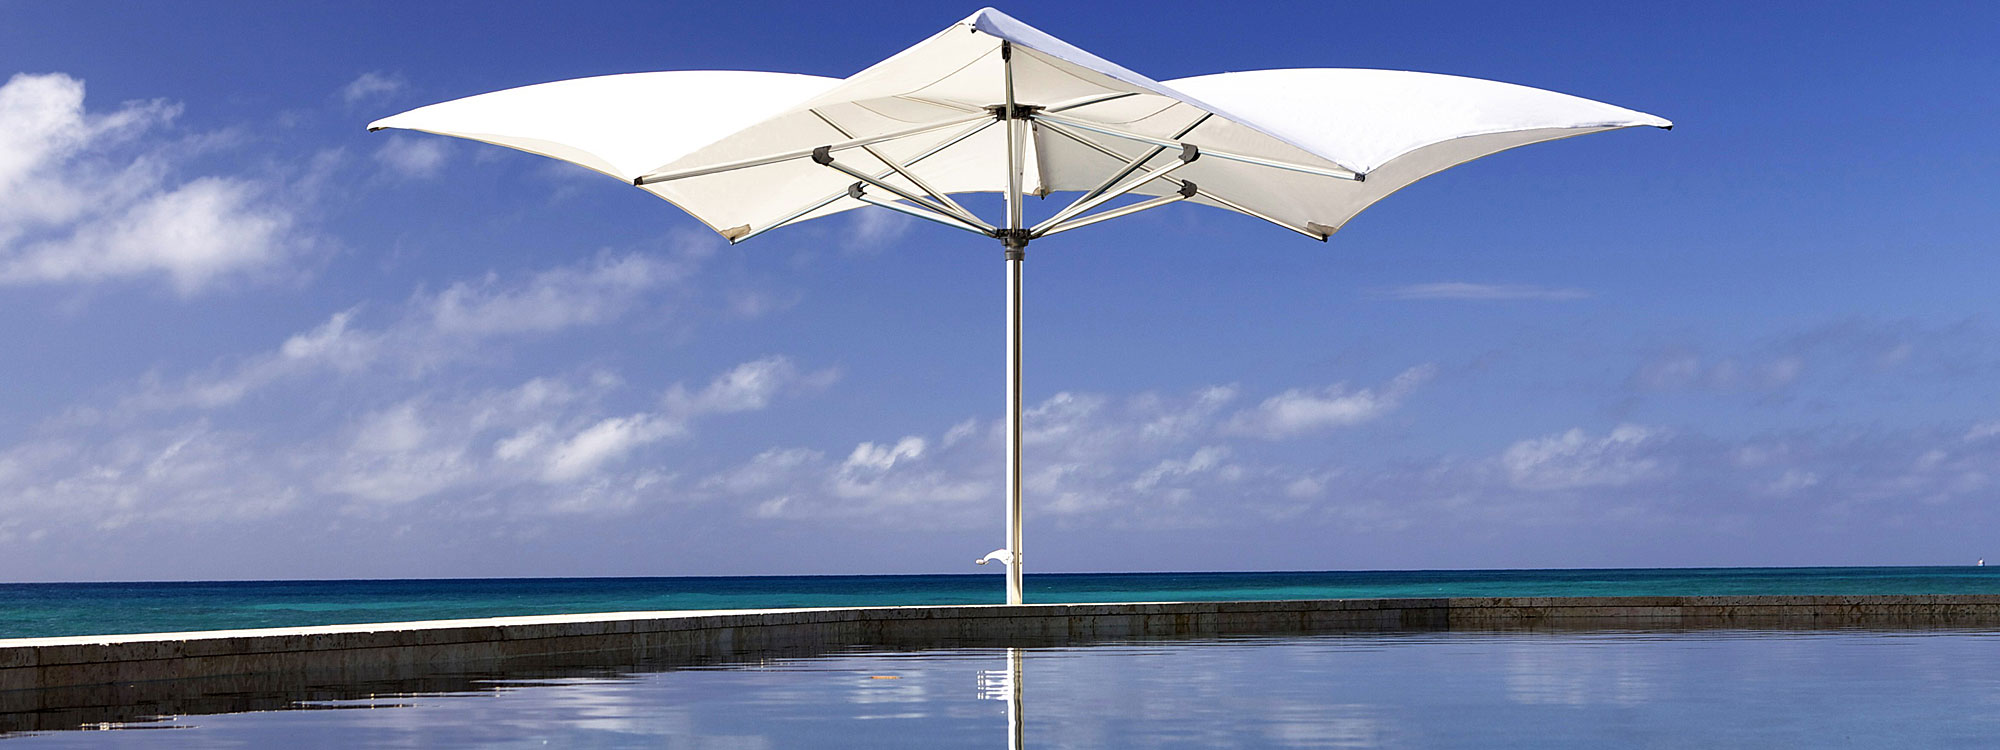 Image of Tuuci Ocean Master Max Manta mast parasol with white canopy and polished titanium mast and ribs, with swimming pool in foreground and sea in background